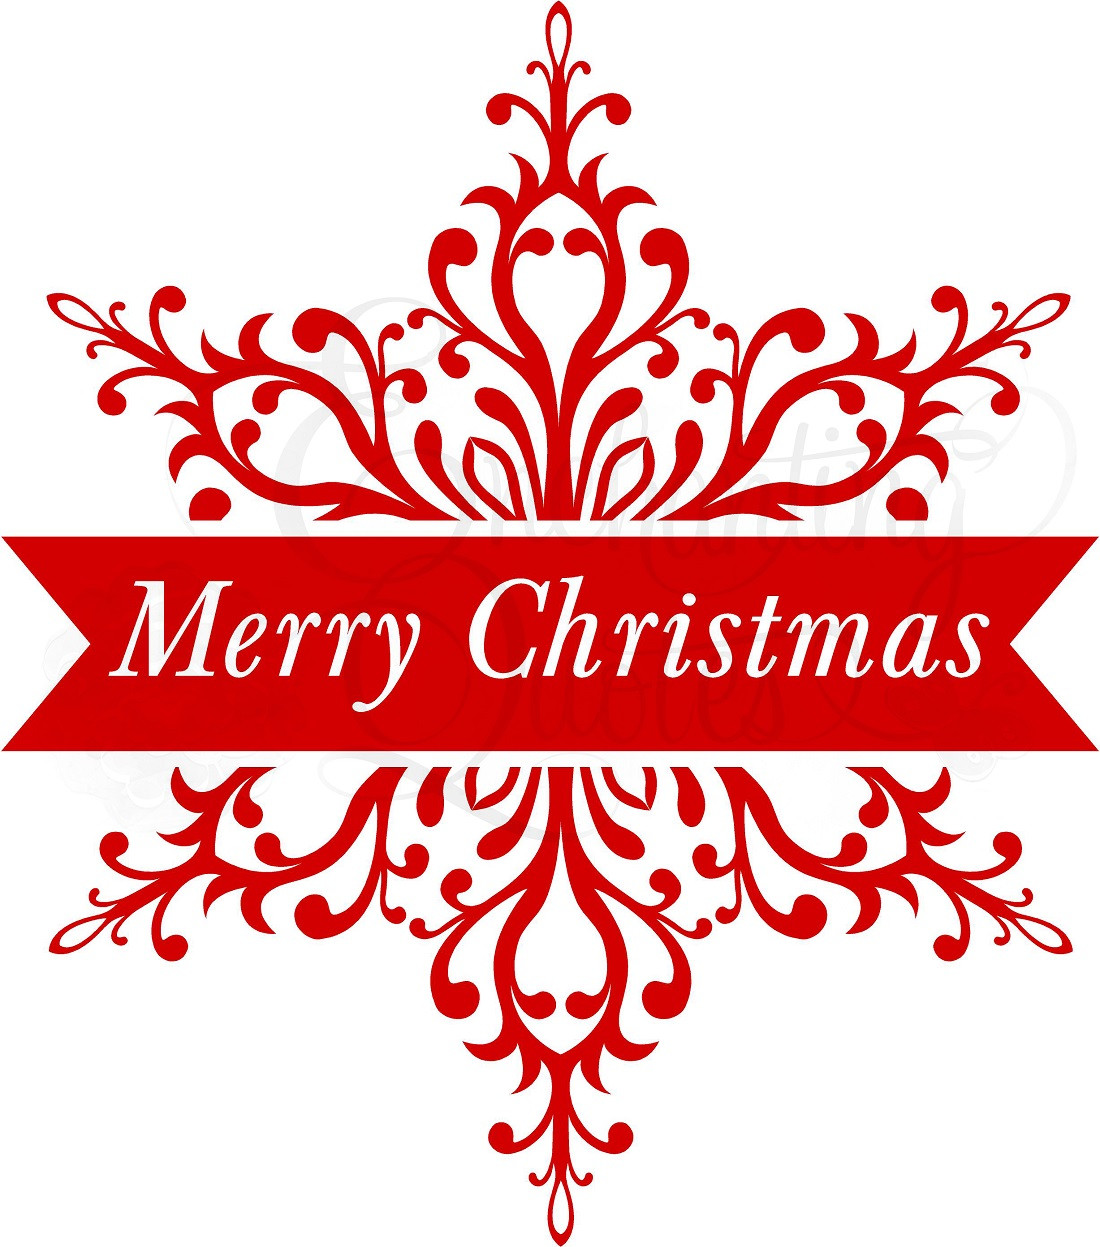 Merry Christmas Images And Quotes
 Christmas Quotes About Family QuotesGram